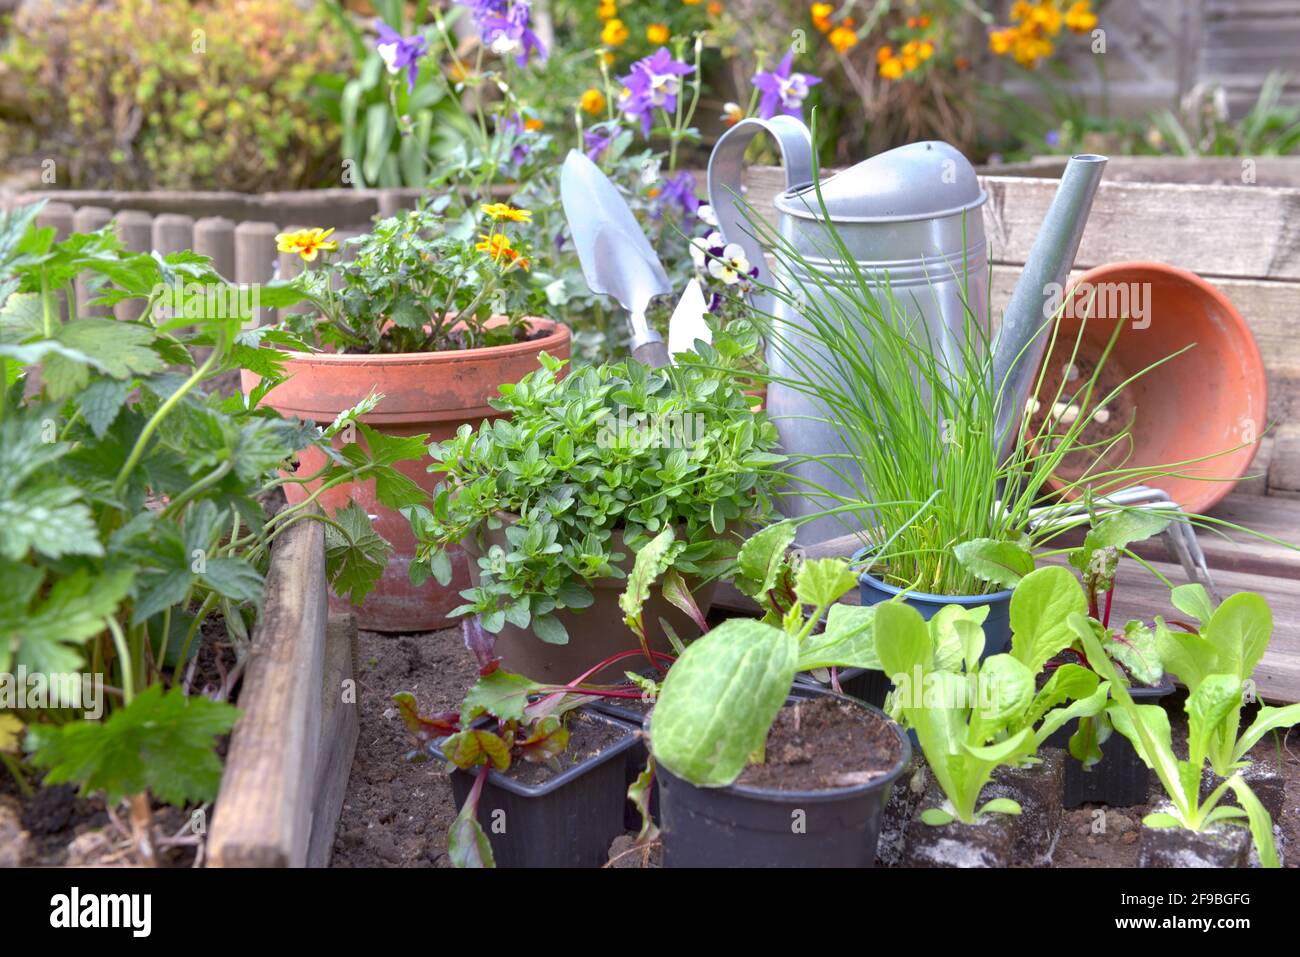 vegetable seedlings and aromatic plant with gardening equipment in a little garden Stock Photo